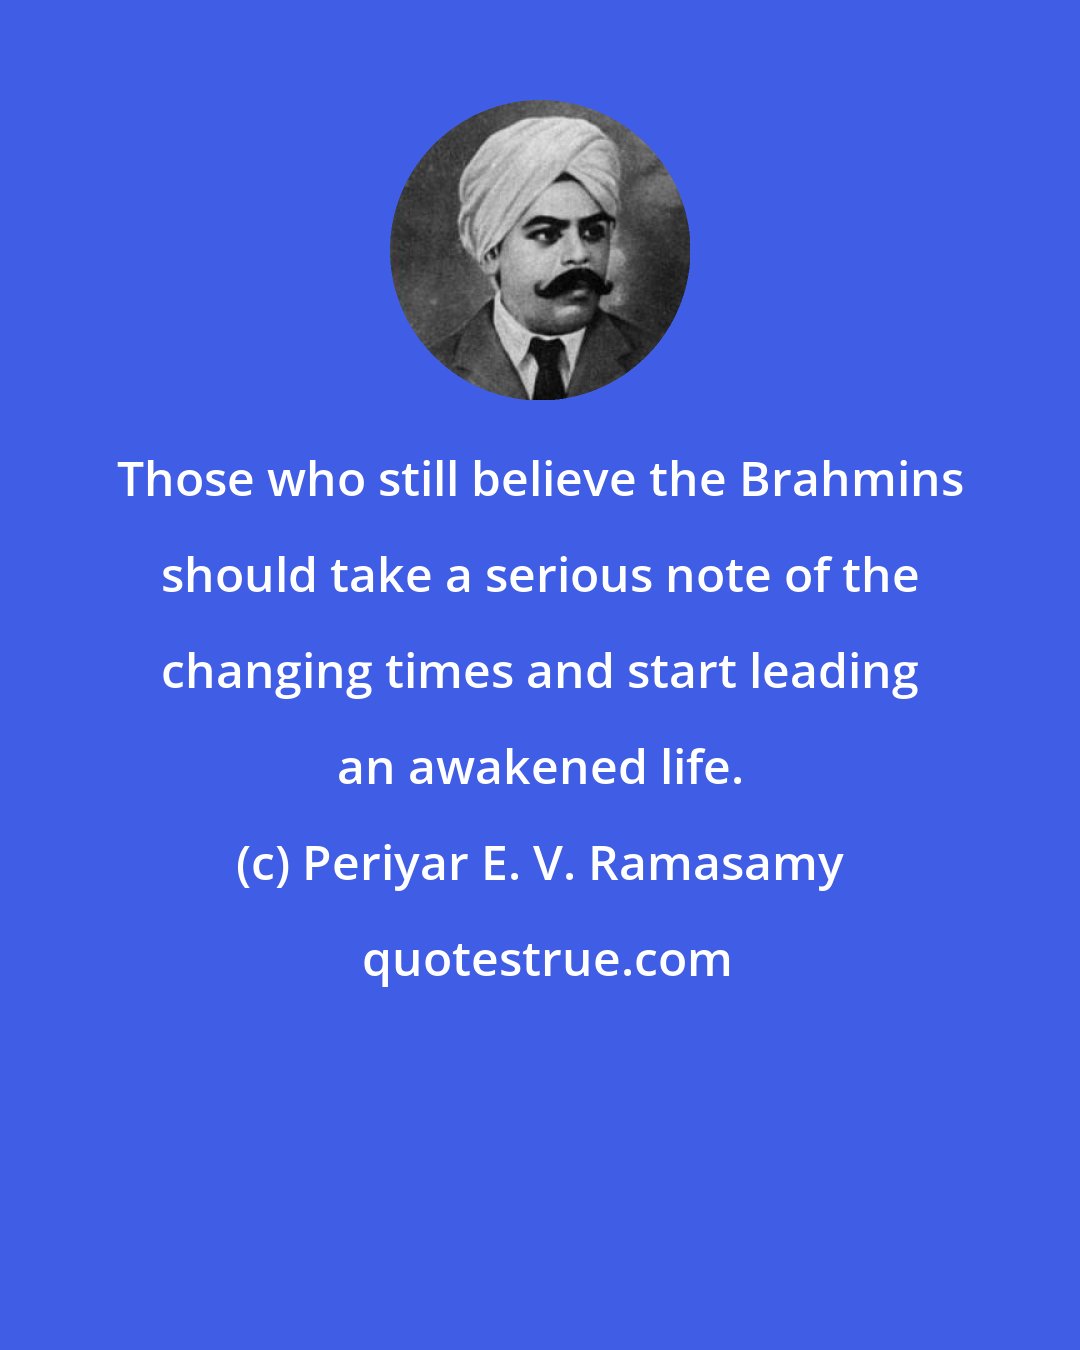 Periyar E. V. Ramasamy: Those who still believe the Brahmins should take a serious note of the changing times and start leading an awakened life.